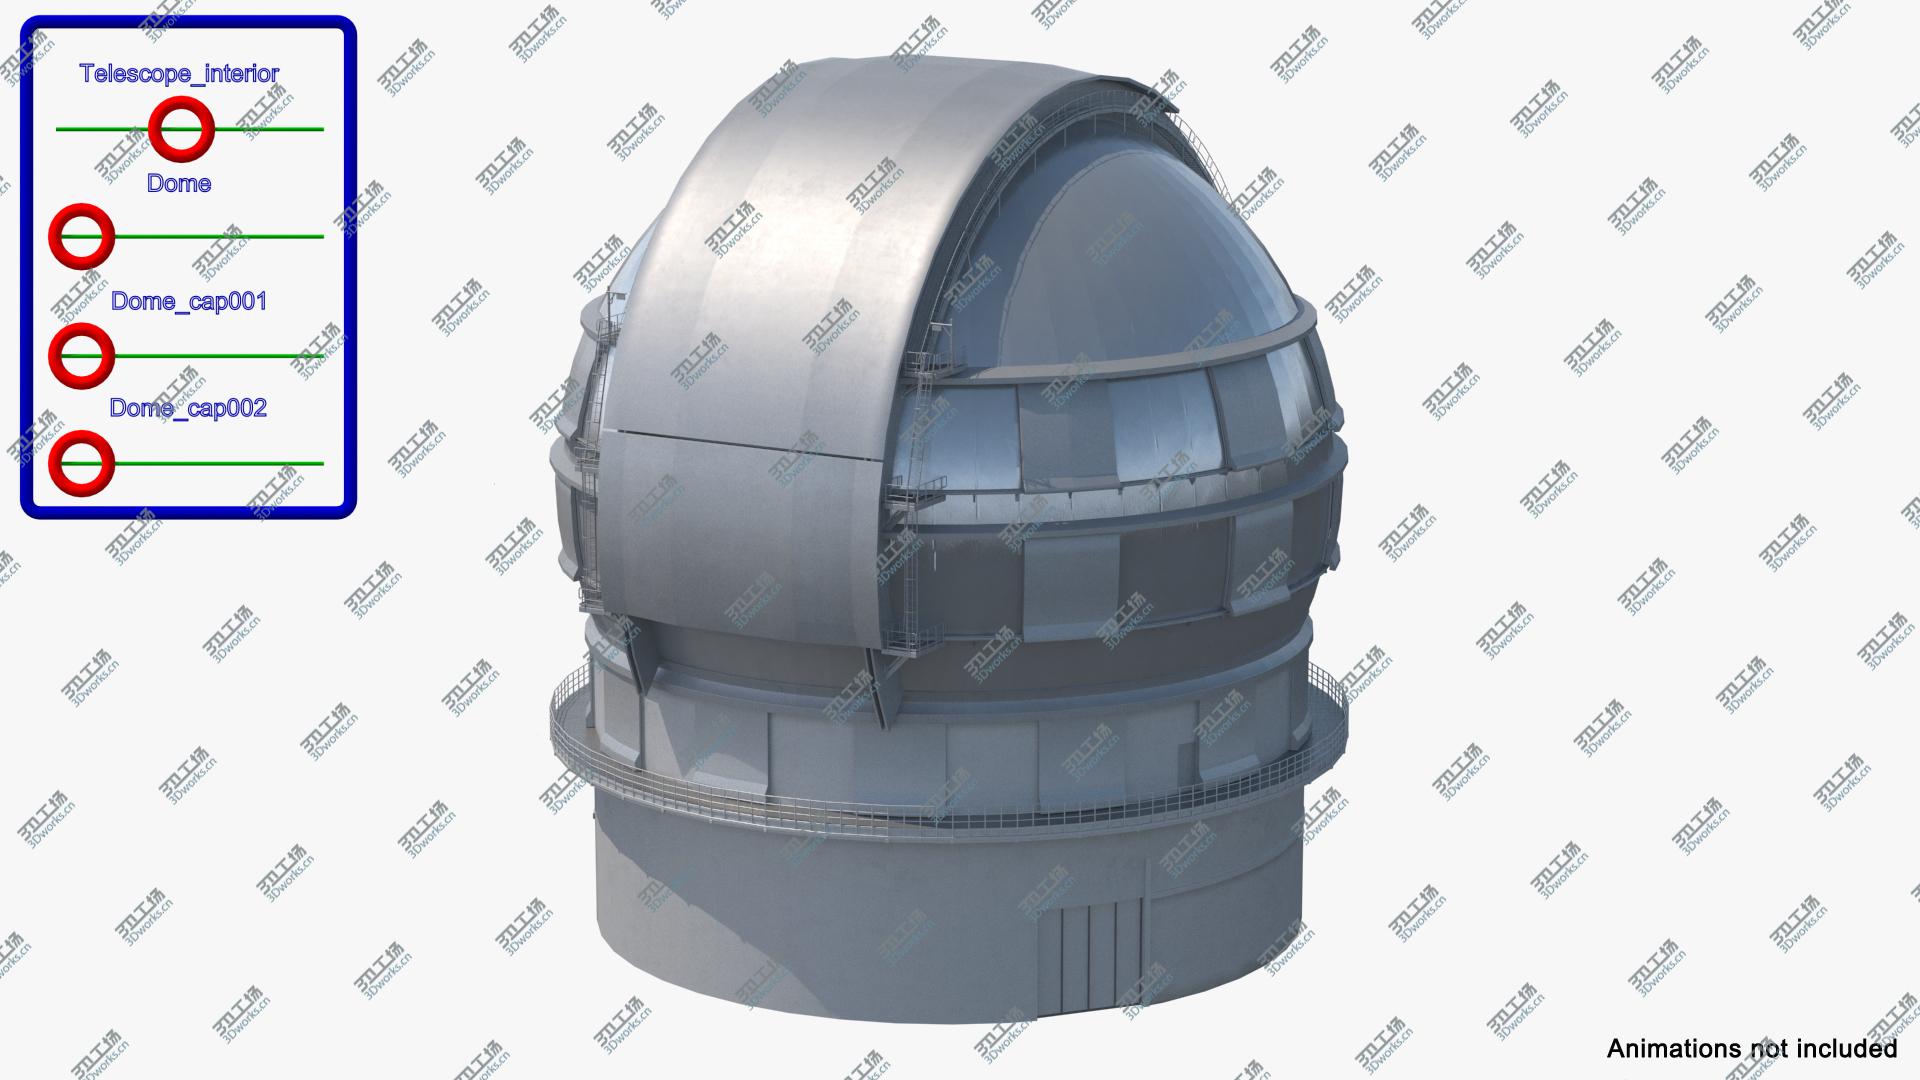 images/goods_img/2021040164/Astronomical Observatory Dome Rigged 3D/3.jpg